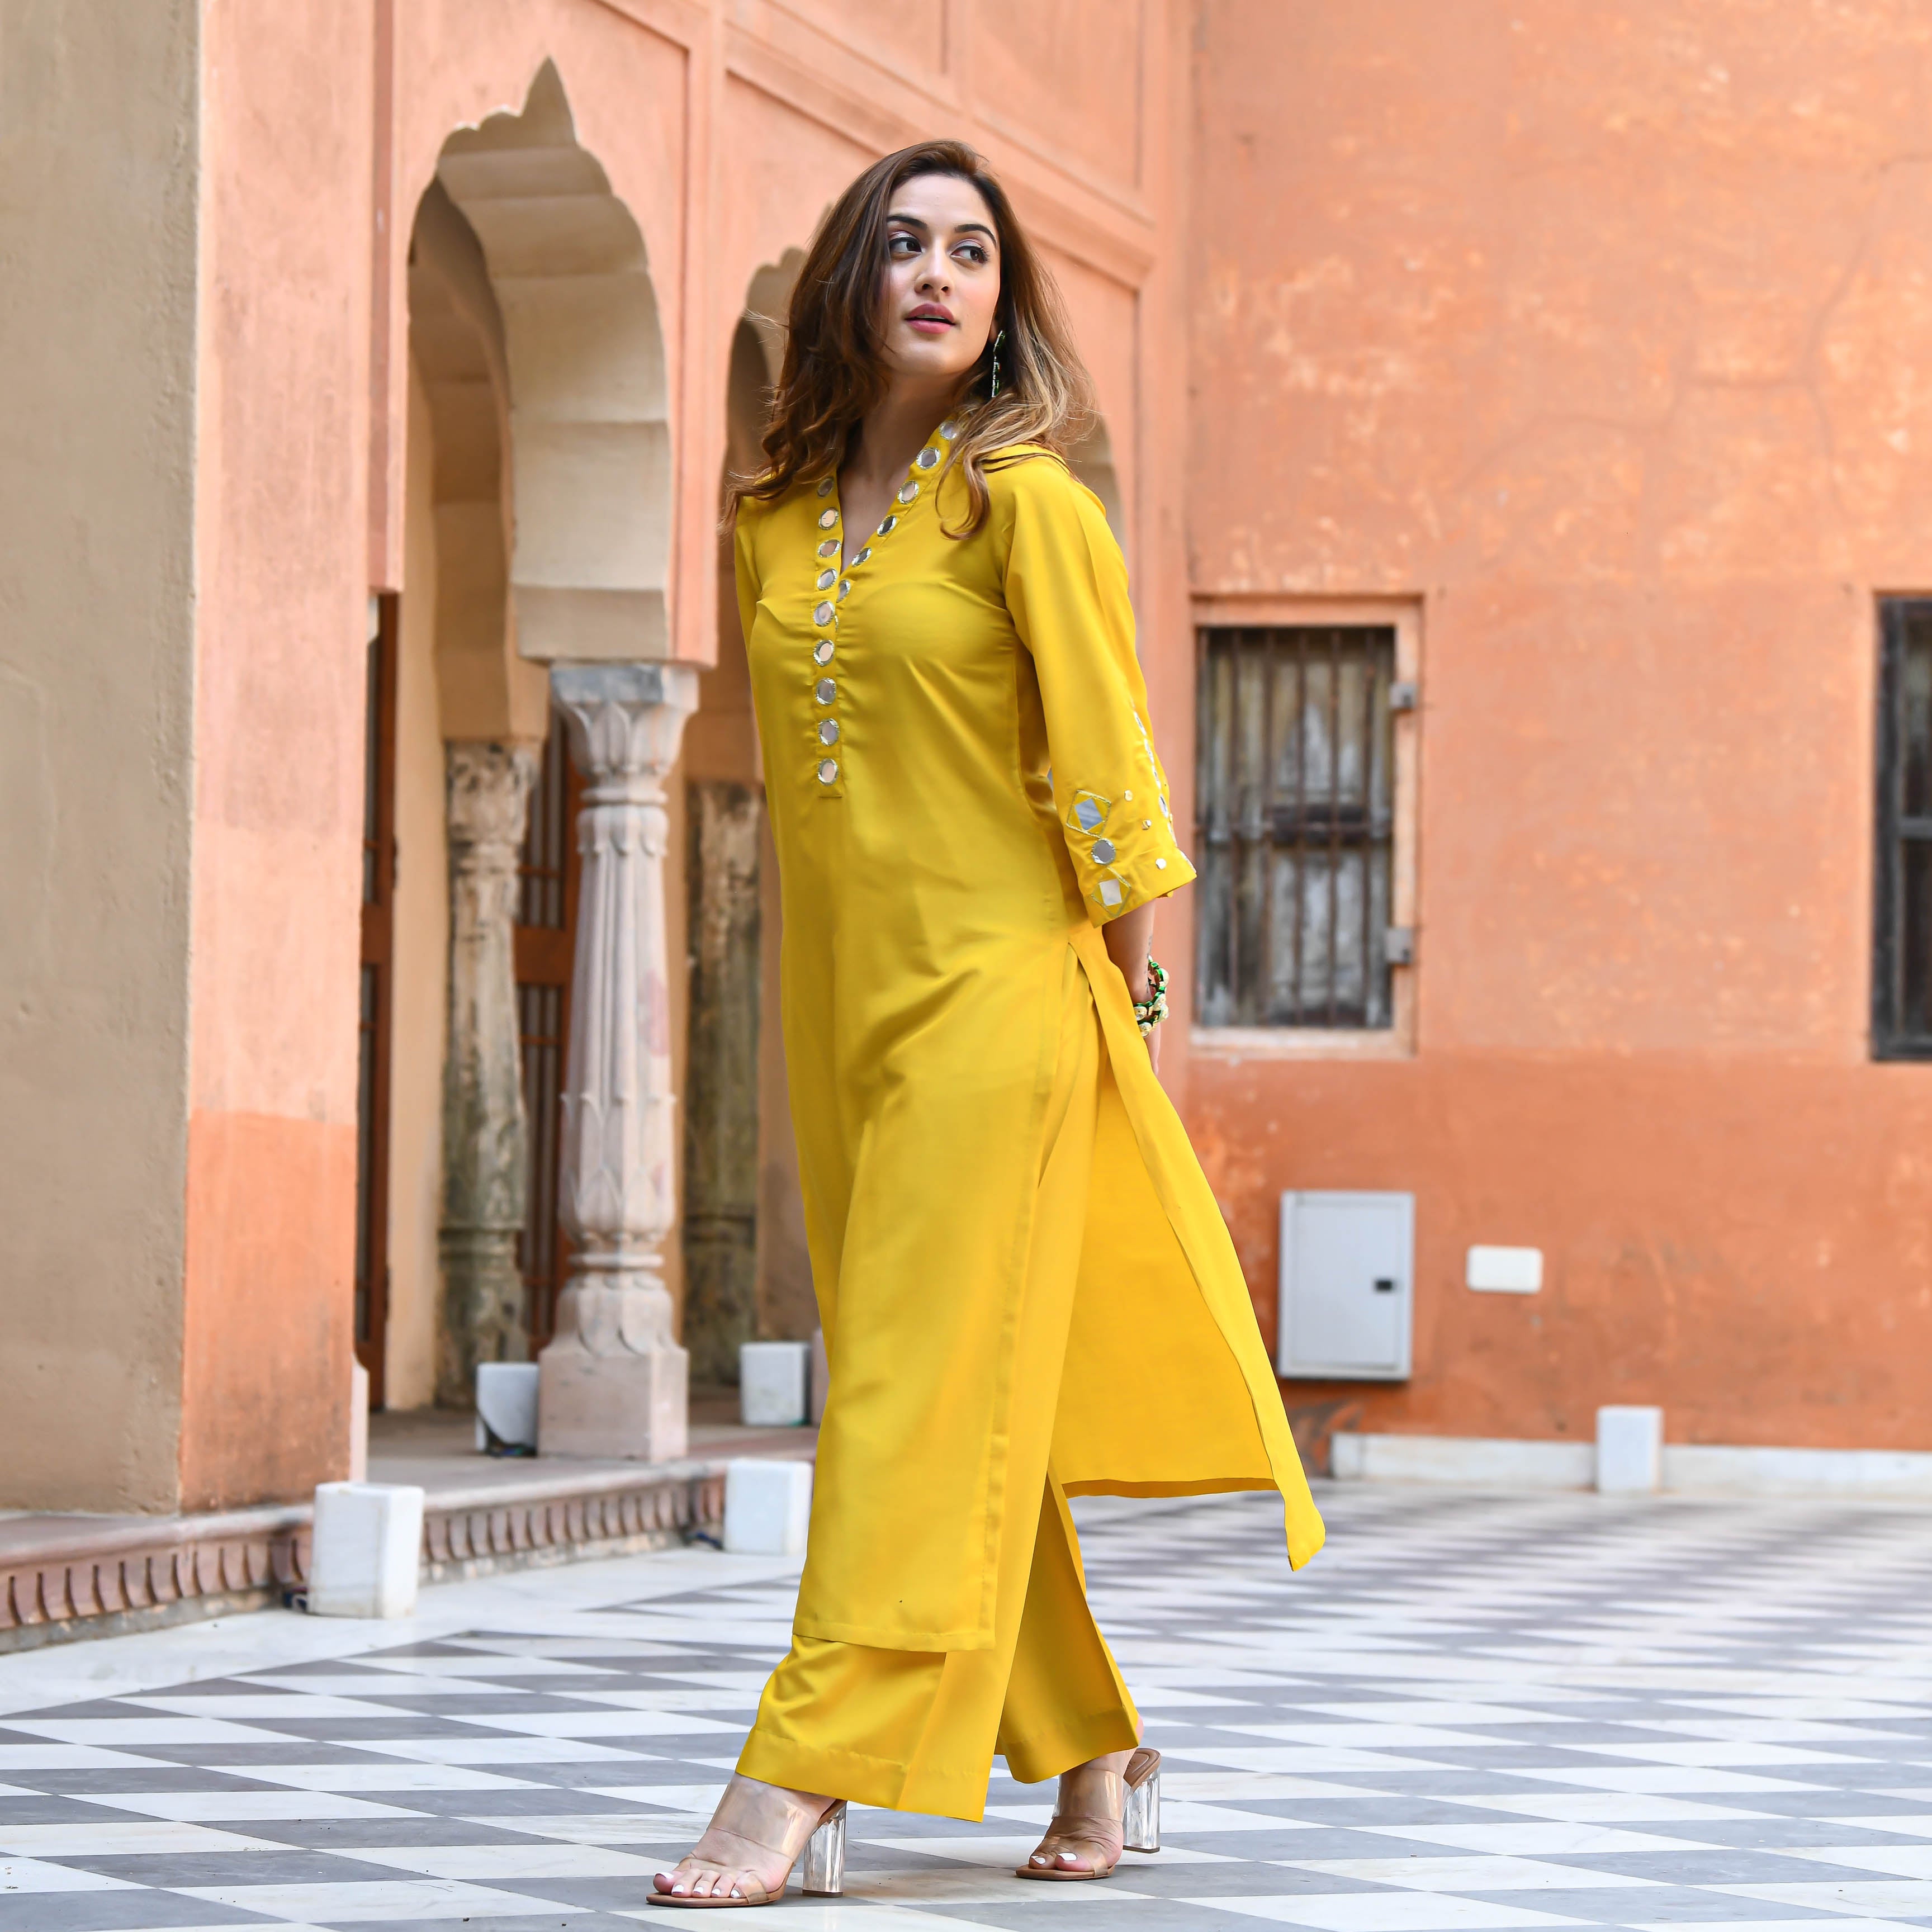 LavanyazDurbarmarg - Kurti with outer Price - Nrs 3000 (sizes available)  Comfortable Jeans Pants - price Nrs 2000(sizes available) Different Colors  Available at BOTH outlets Lavanyaz the fashion studio | Facebook